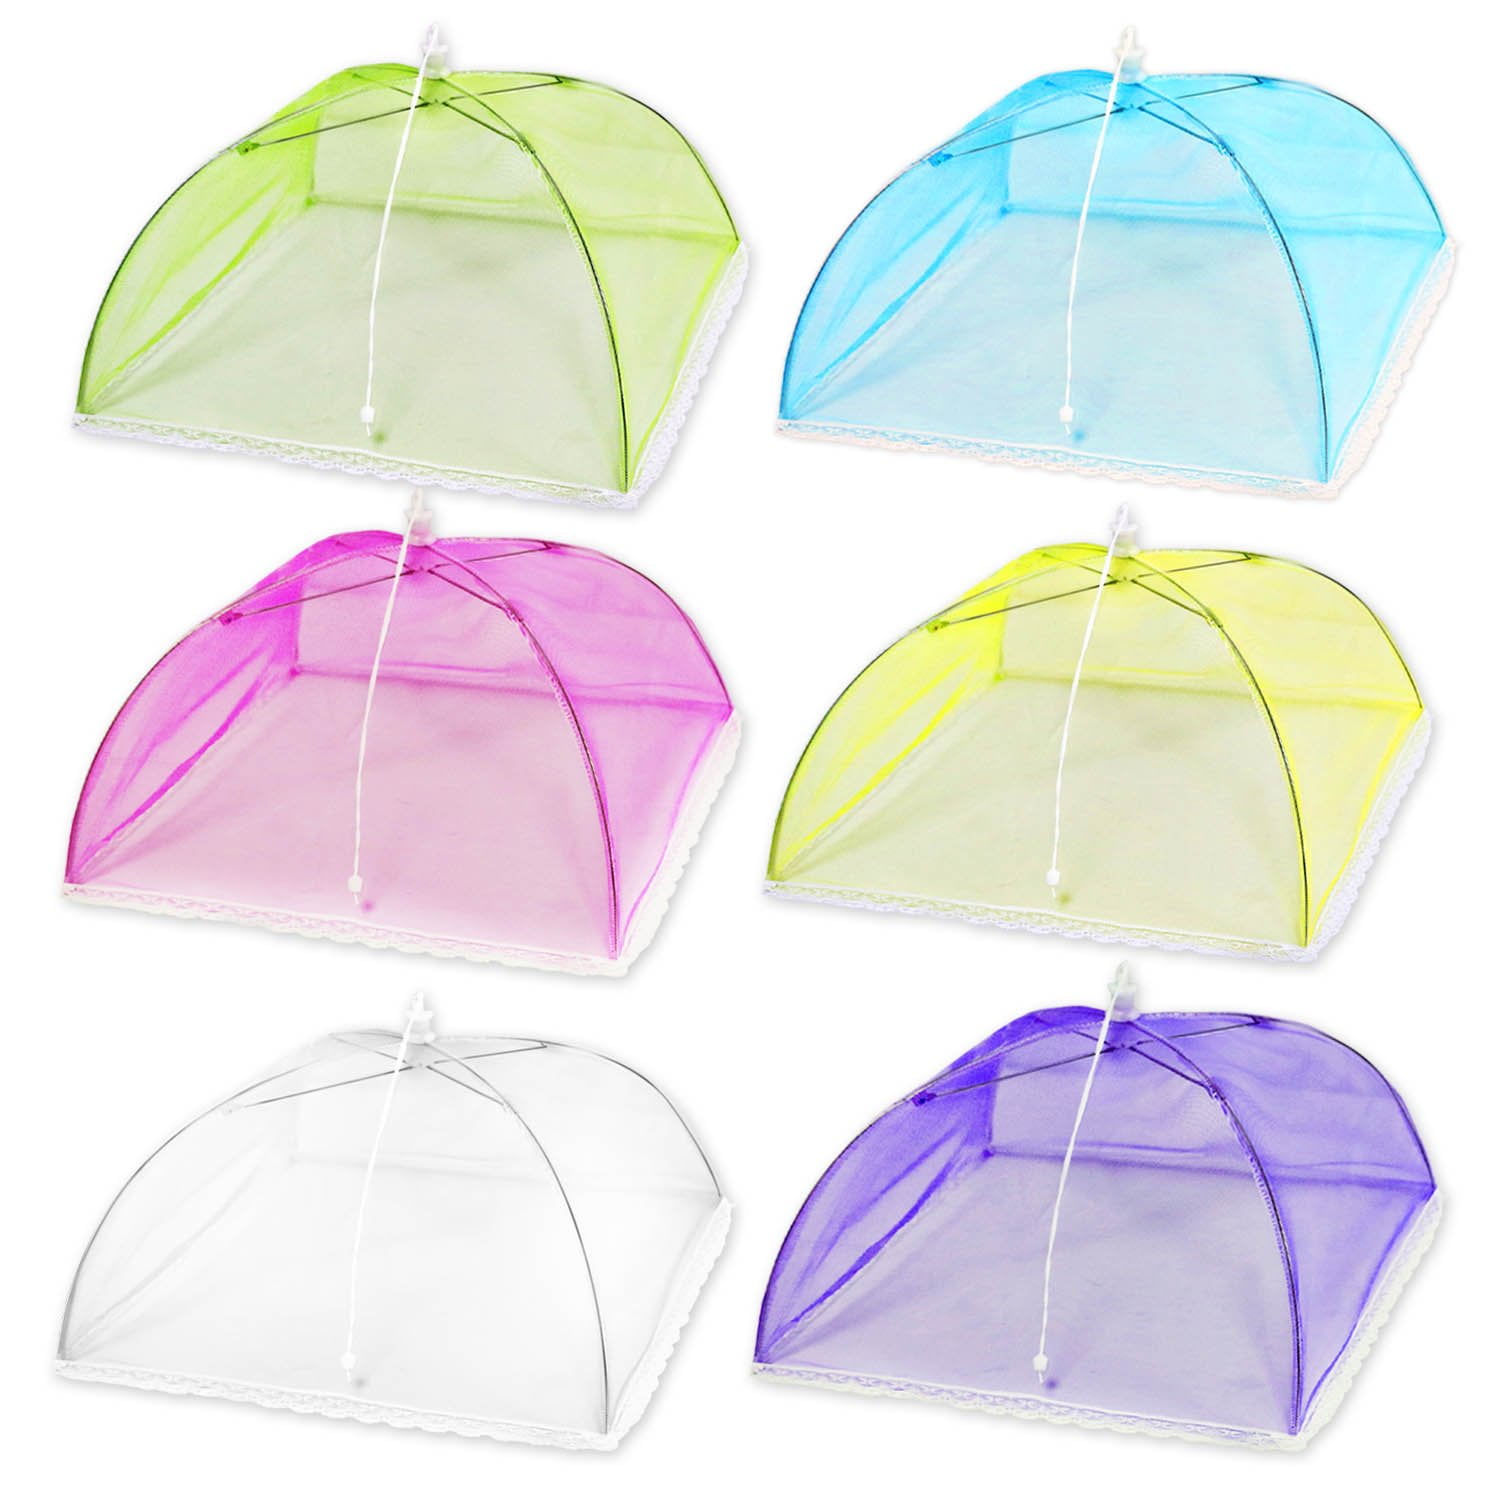 Food Umbrella Covers Fly Mosquito Mesh Screen Net for Picnic BBQ Kitchen^ 